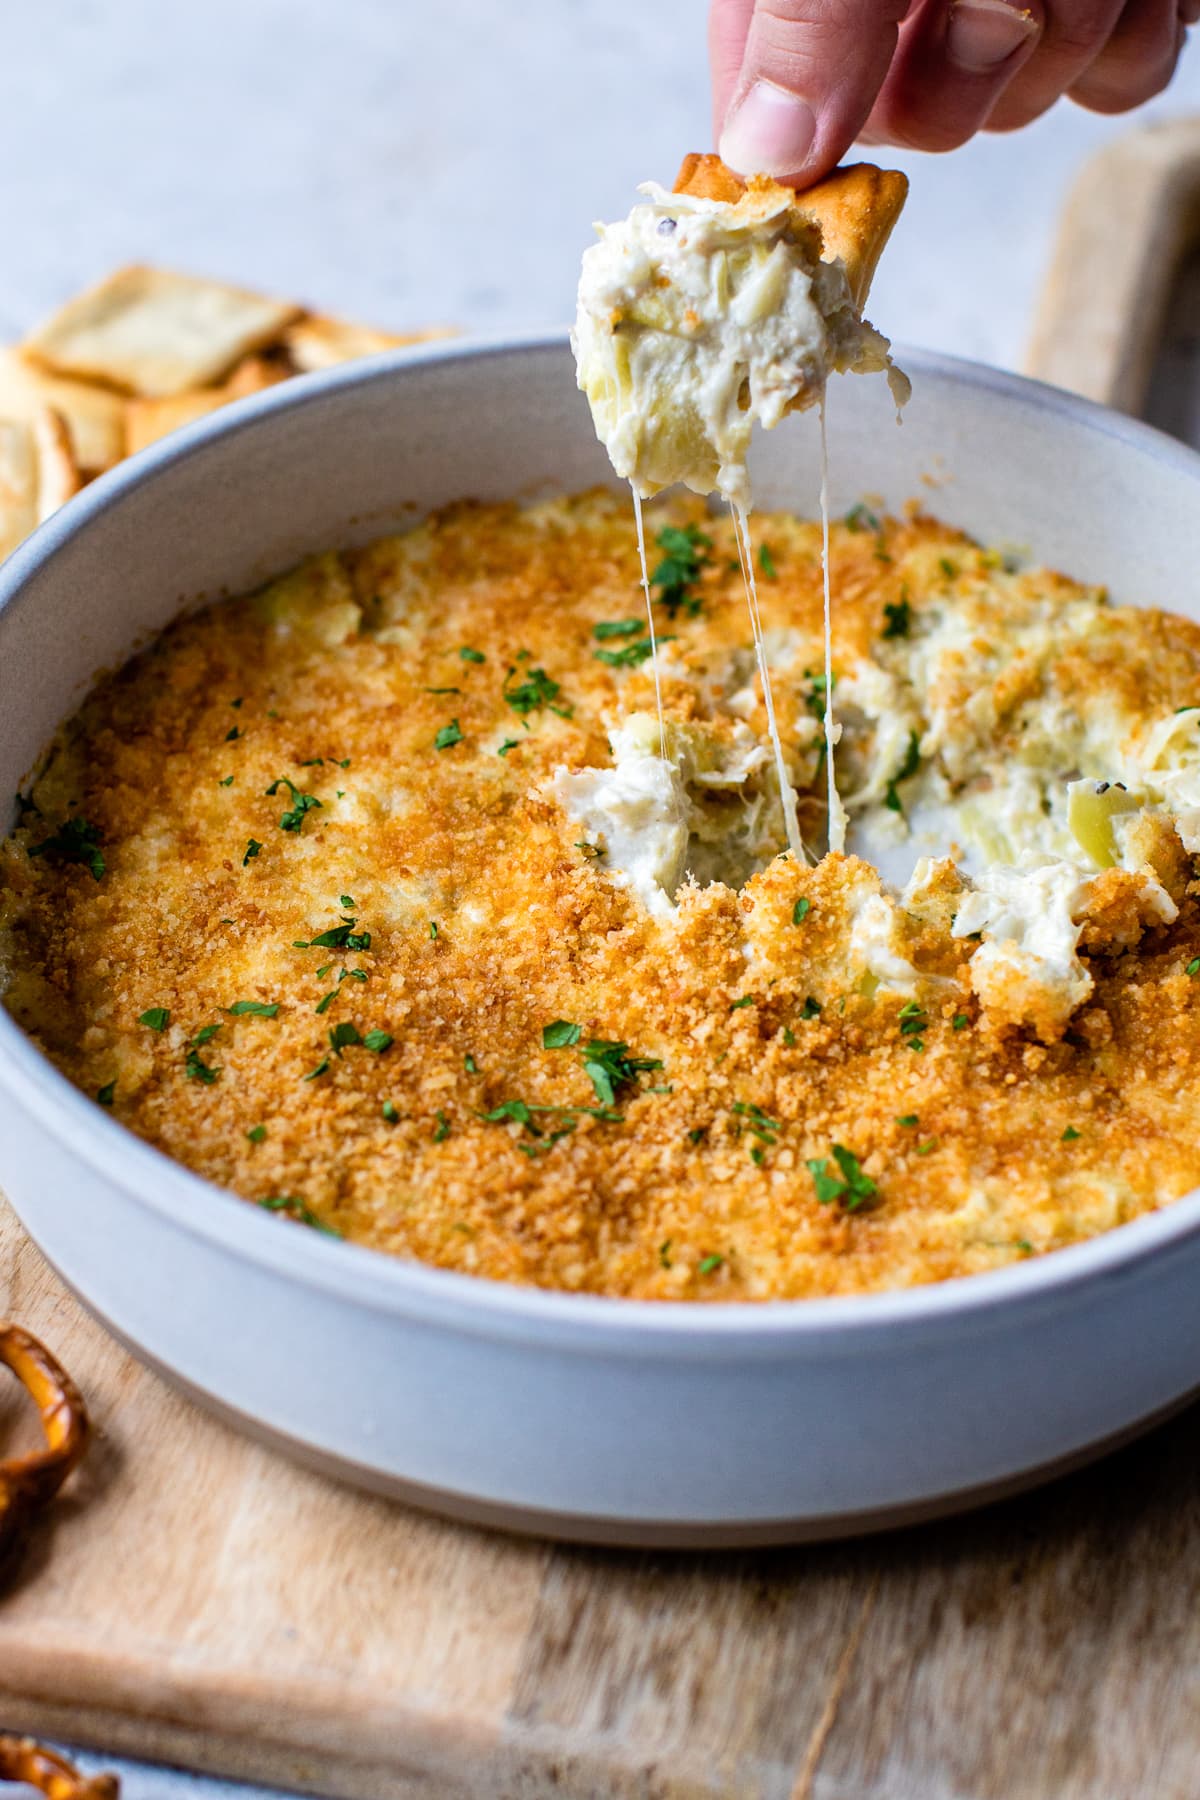 Spicy artichoke dip with chips